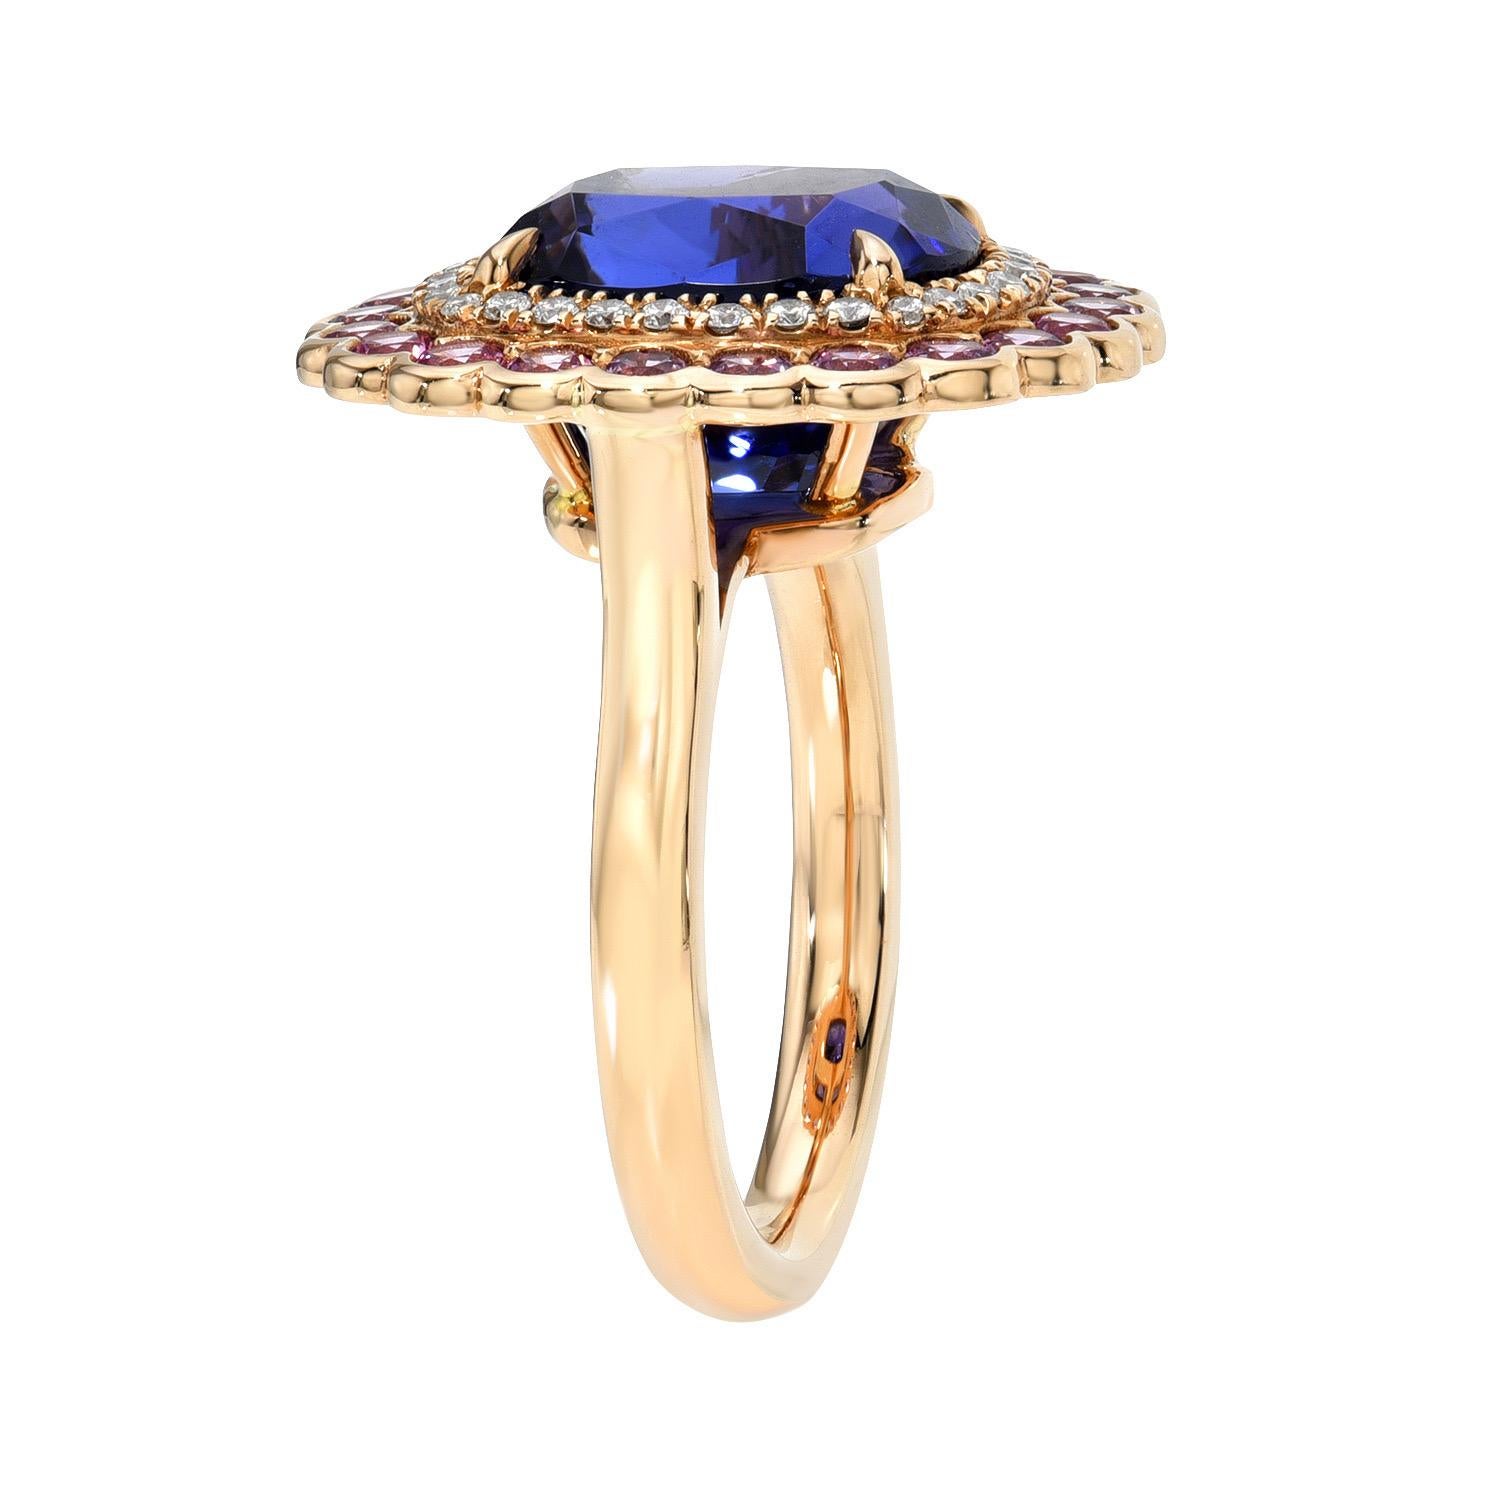 Vivid 6.59 carat Tanzanite cushion, 18K rose gold ring, decorated with a total of 1.07 carats of round Pink Sapphires, and 0.20 carat round brilliant diamonds.
Ring size 6. Resizing is complementary upon request.
Returns are accepted and paid by us